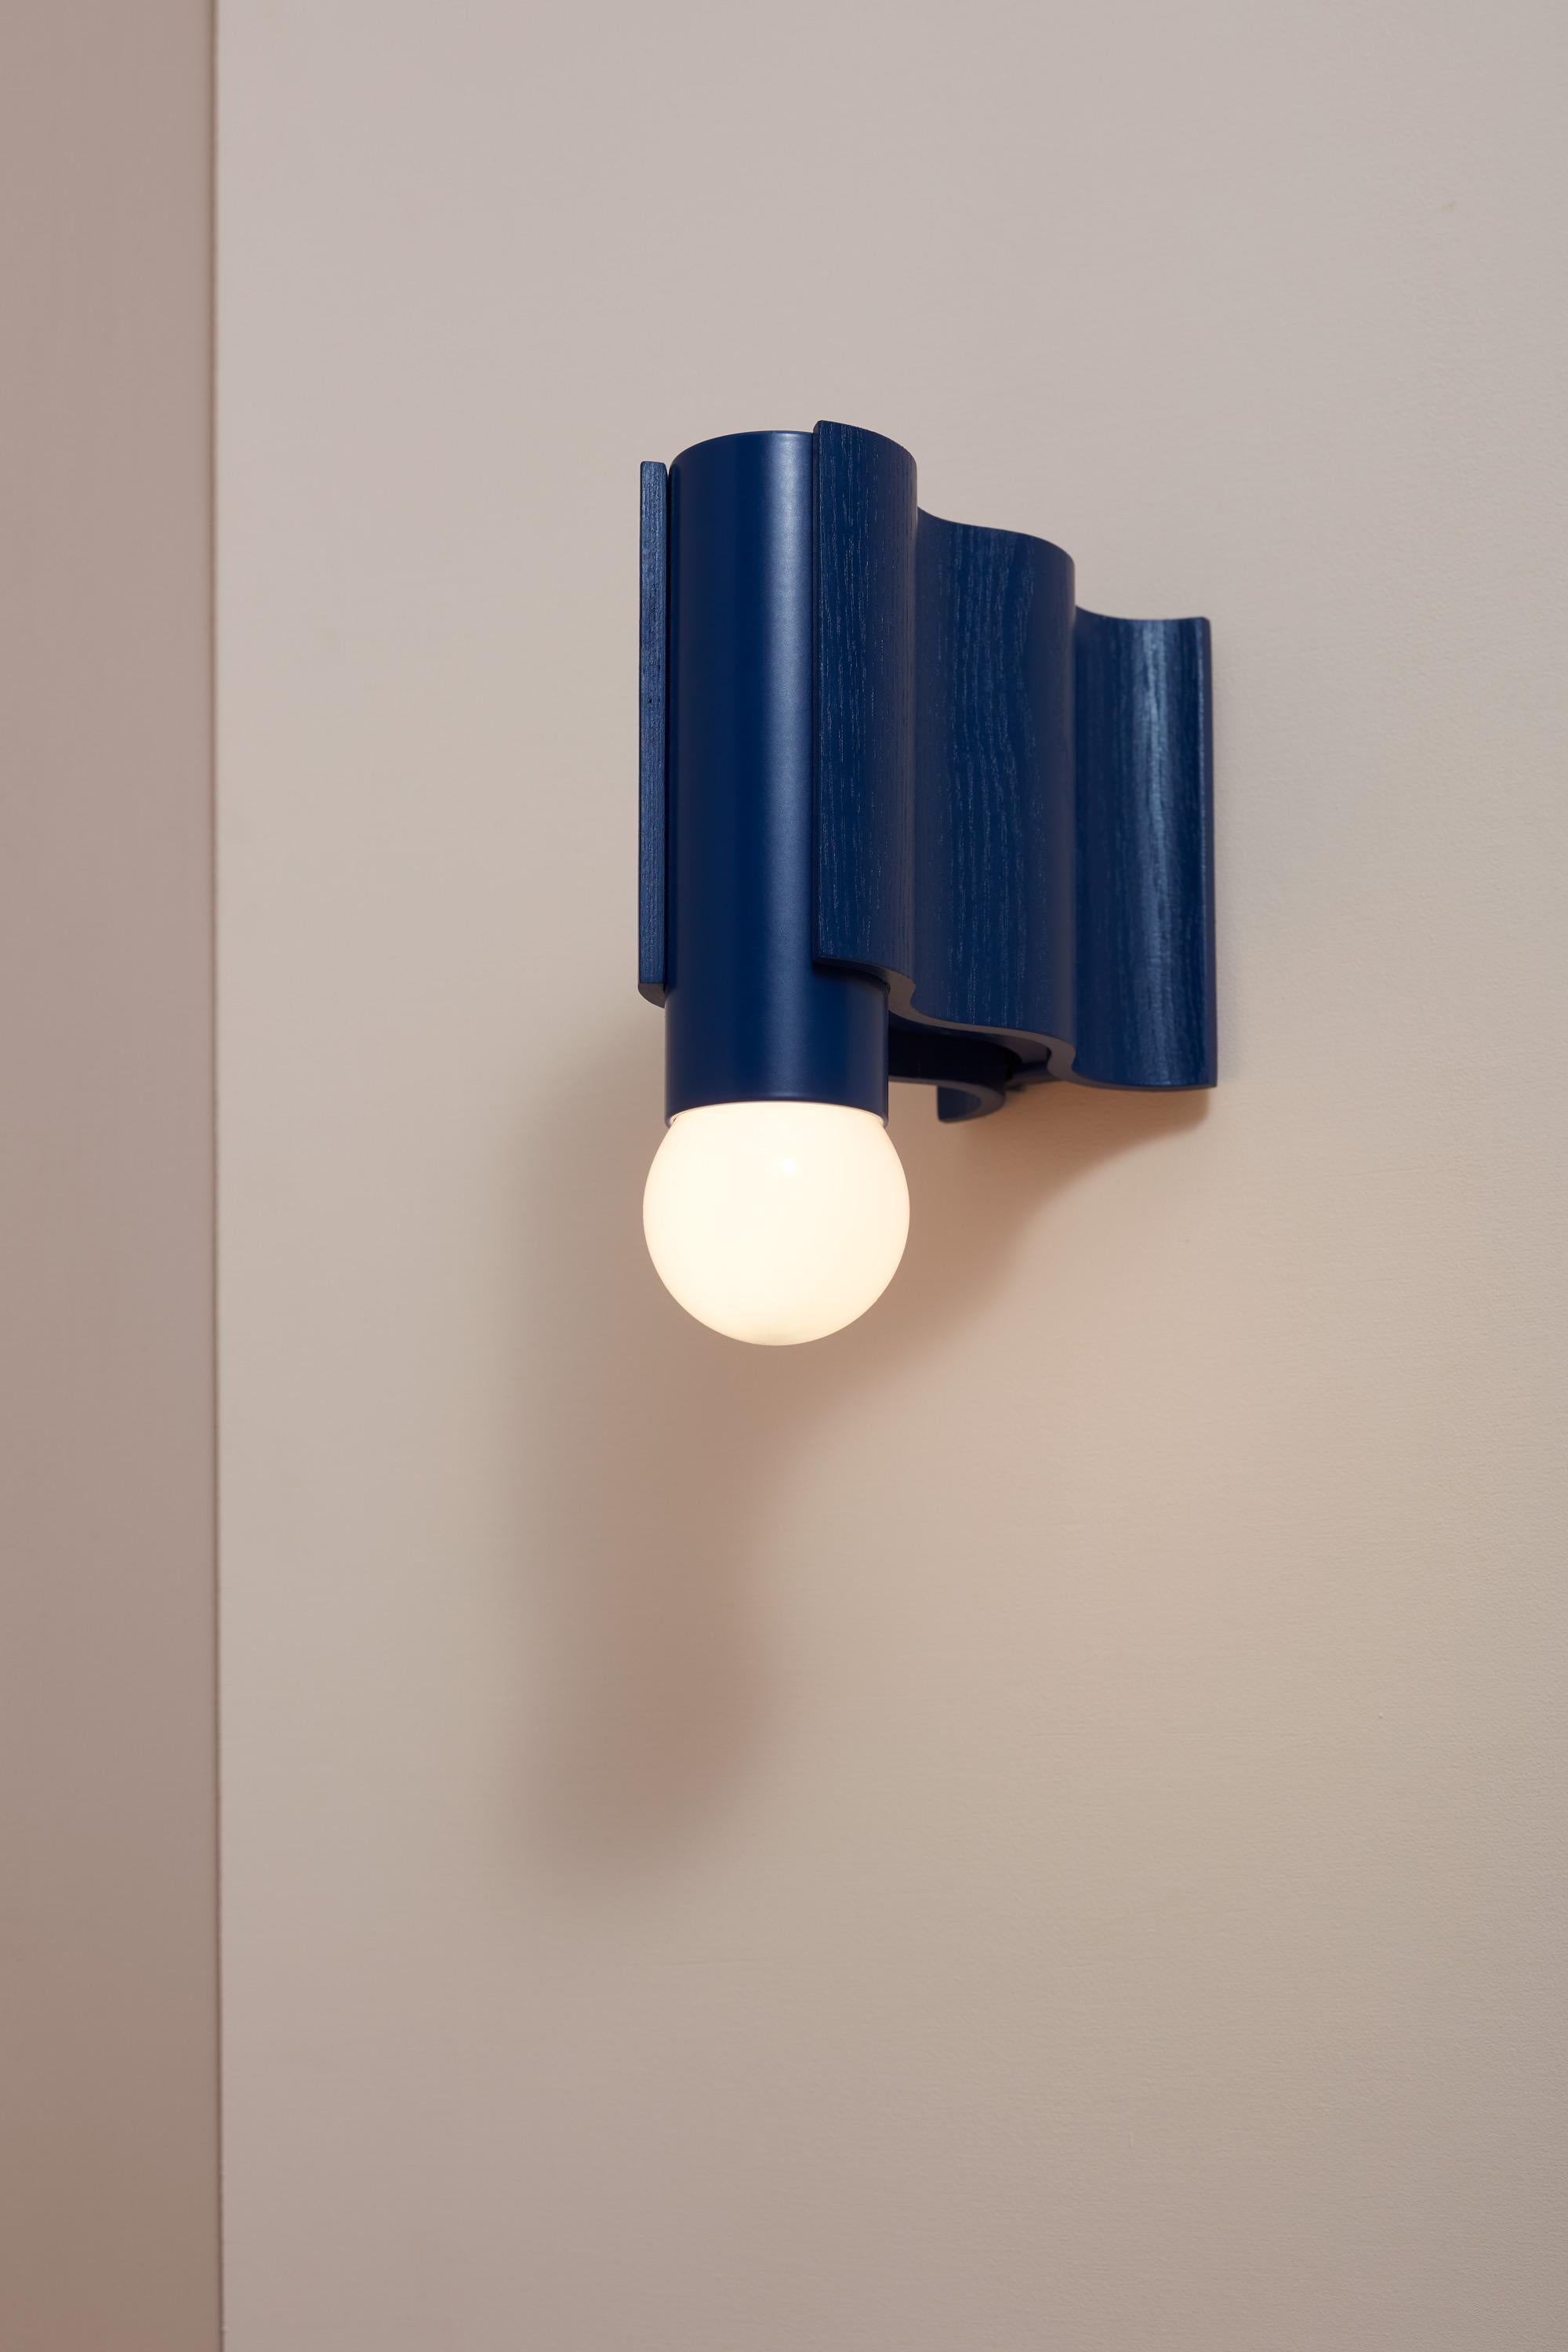 Short single sconce made from sapphire blue painted ash veneered plywood and sapphire blue powder-coated aluminium tube.

Technical information:
- Comes with dimmable bulb (Class A60, 8W, 720 Lumen, 3000° Kelvin, A+ energy rating, Ra > 80)
- Can be